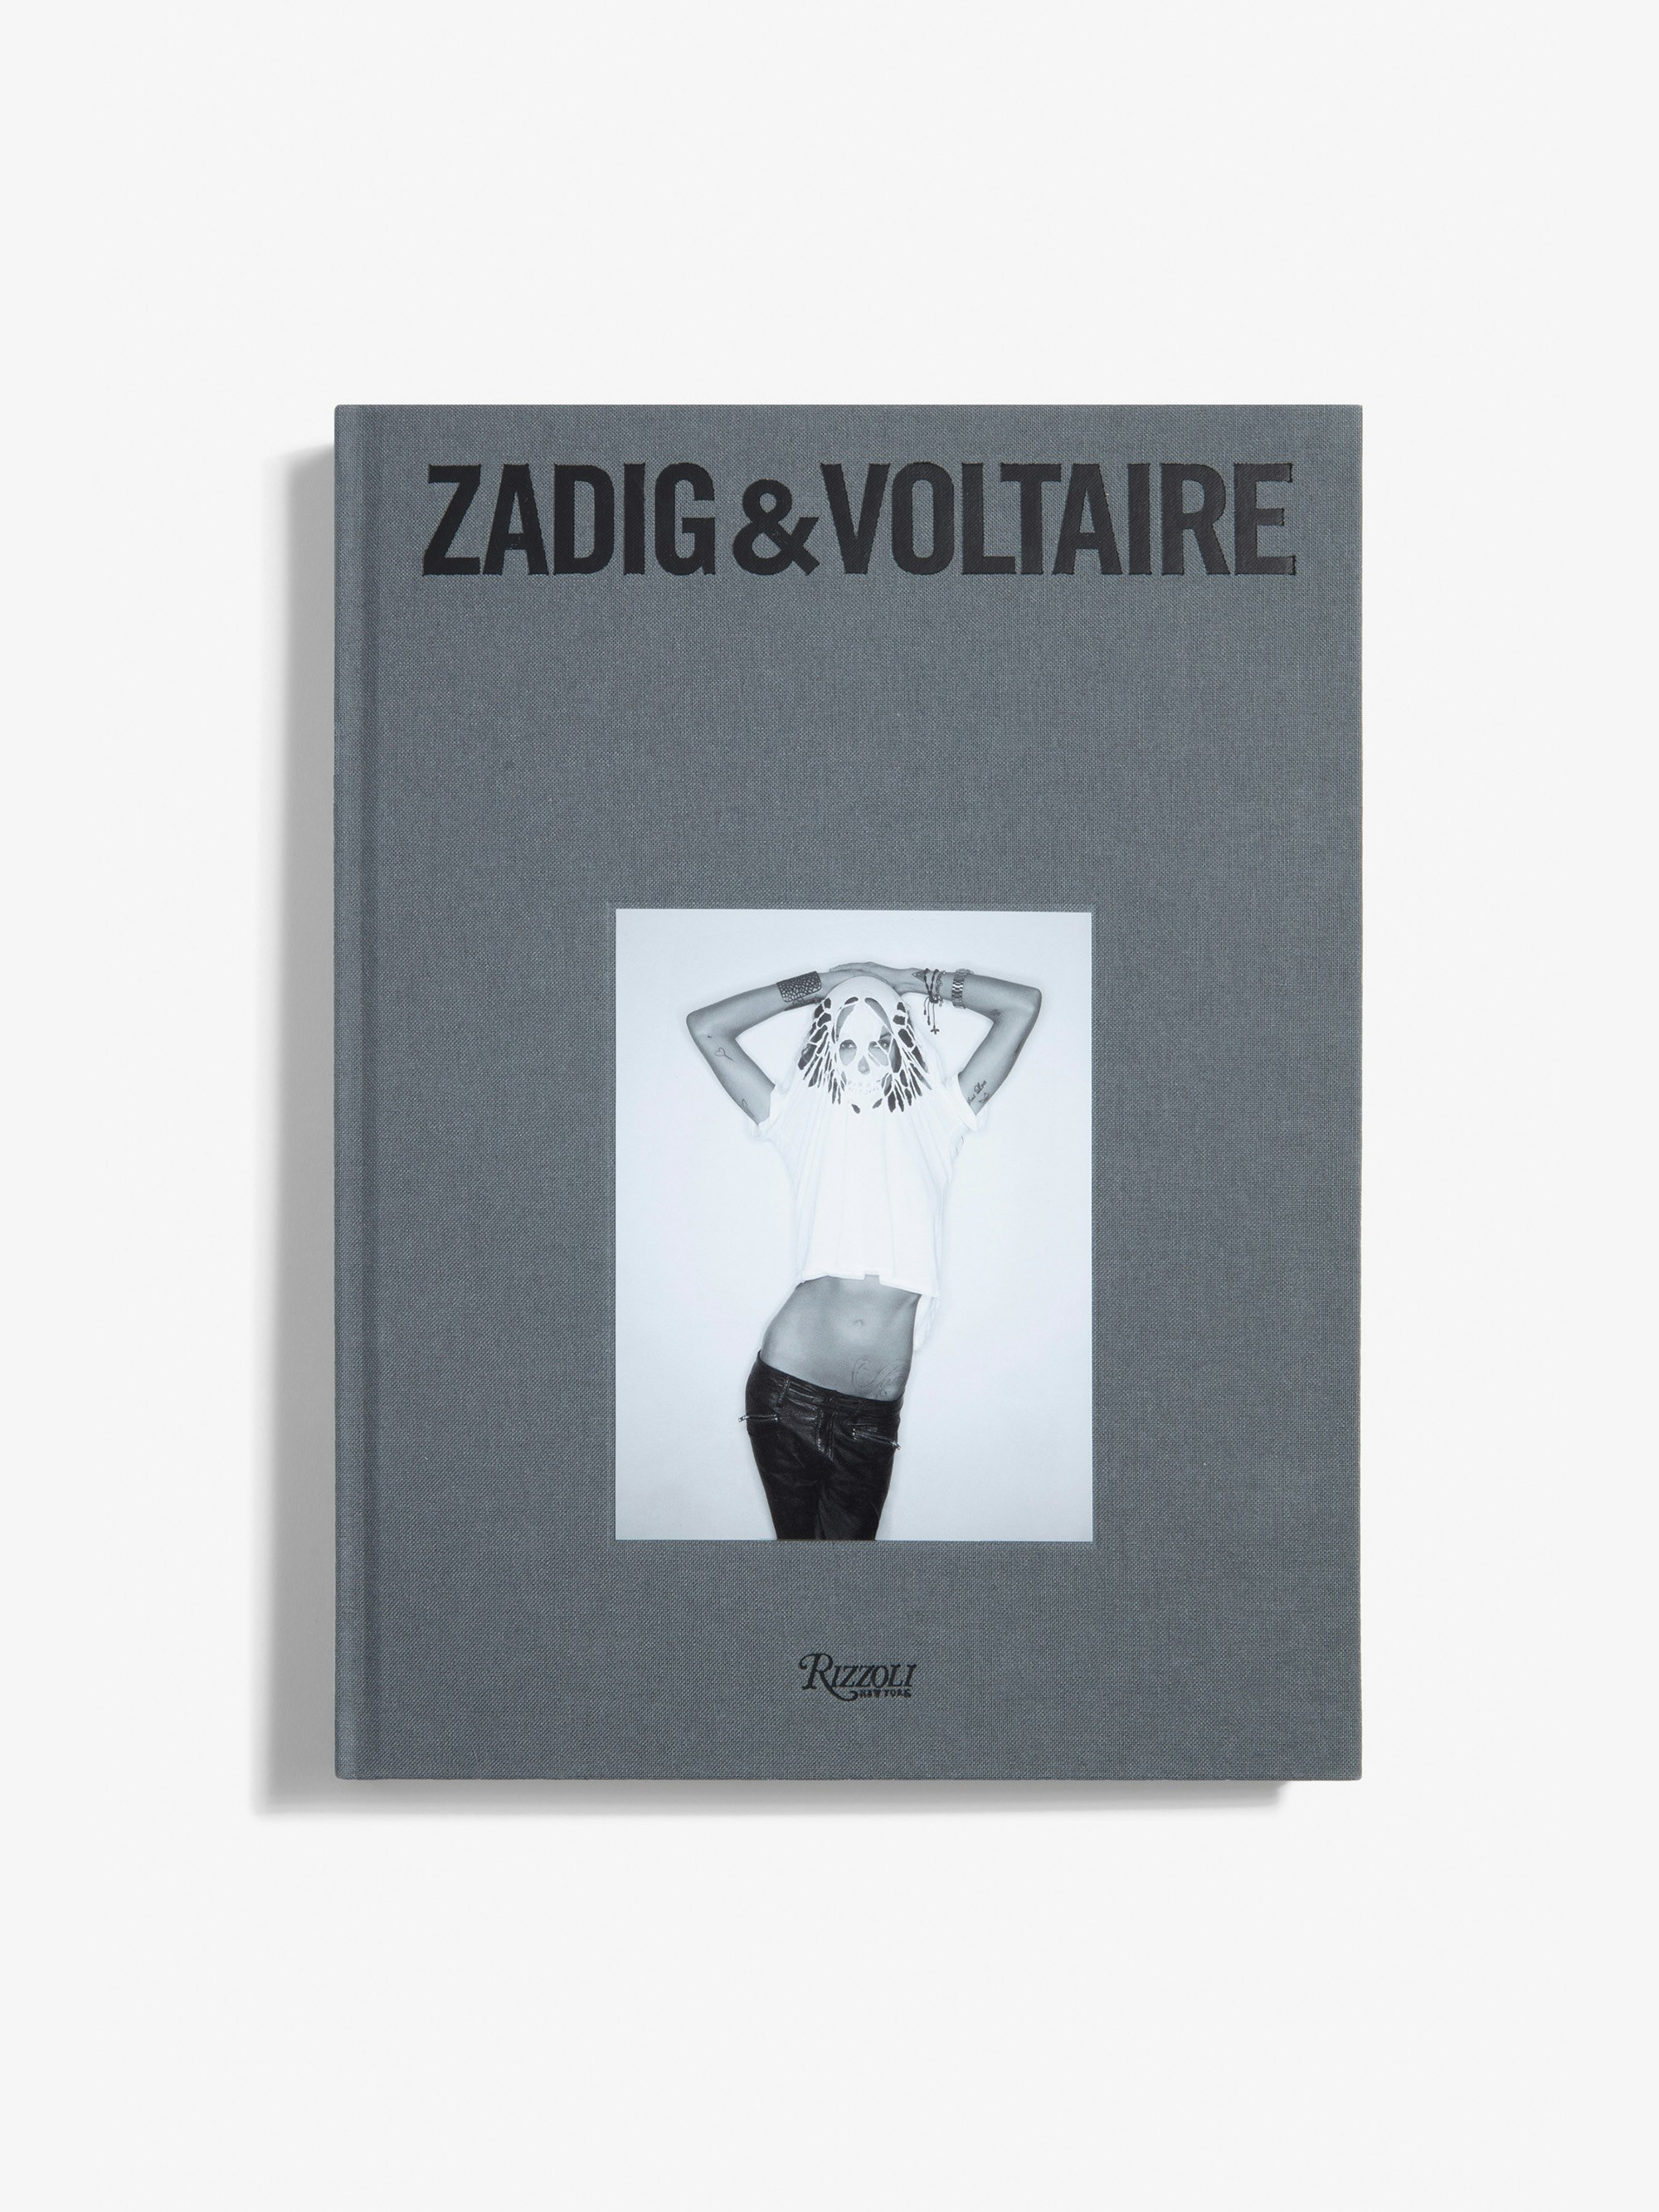 Book "Zadig&Voltaire: Established 1997 in Paris" - English Version - The first monograph on Zadig&Voltaire, published on the occasion of the brand’s 25th anniversary - English version.